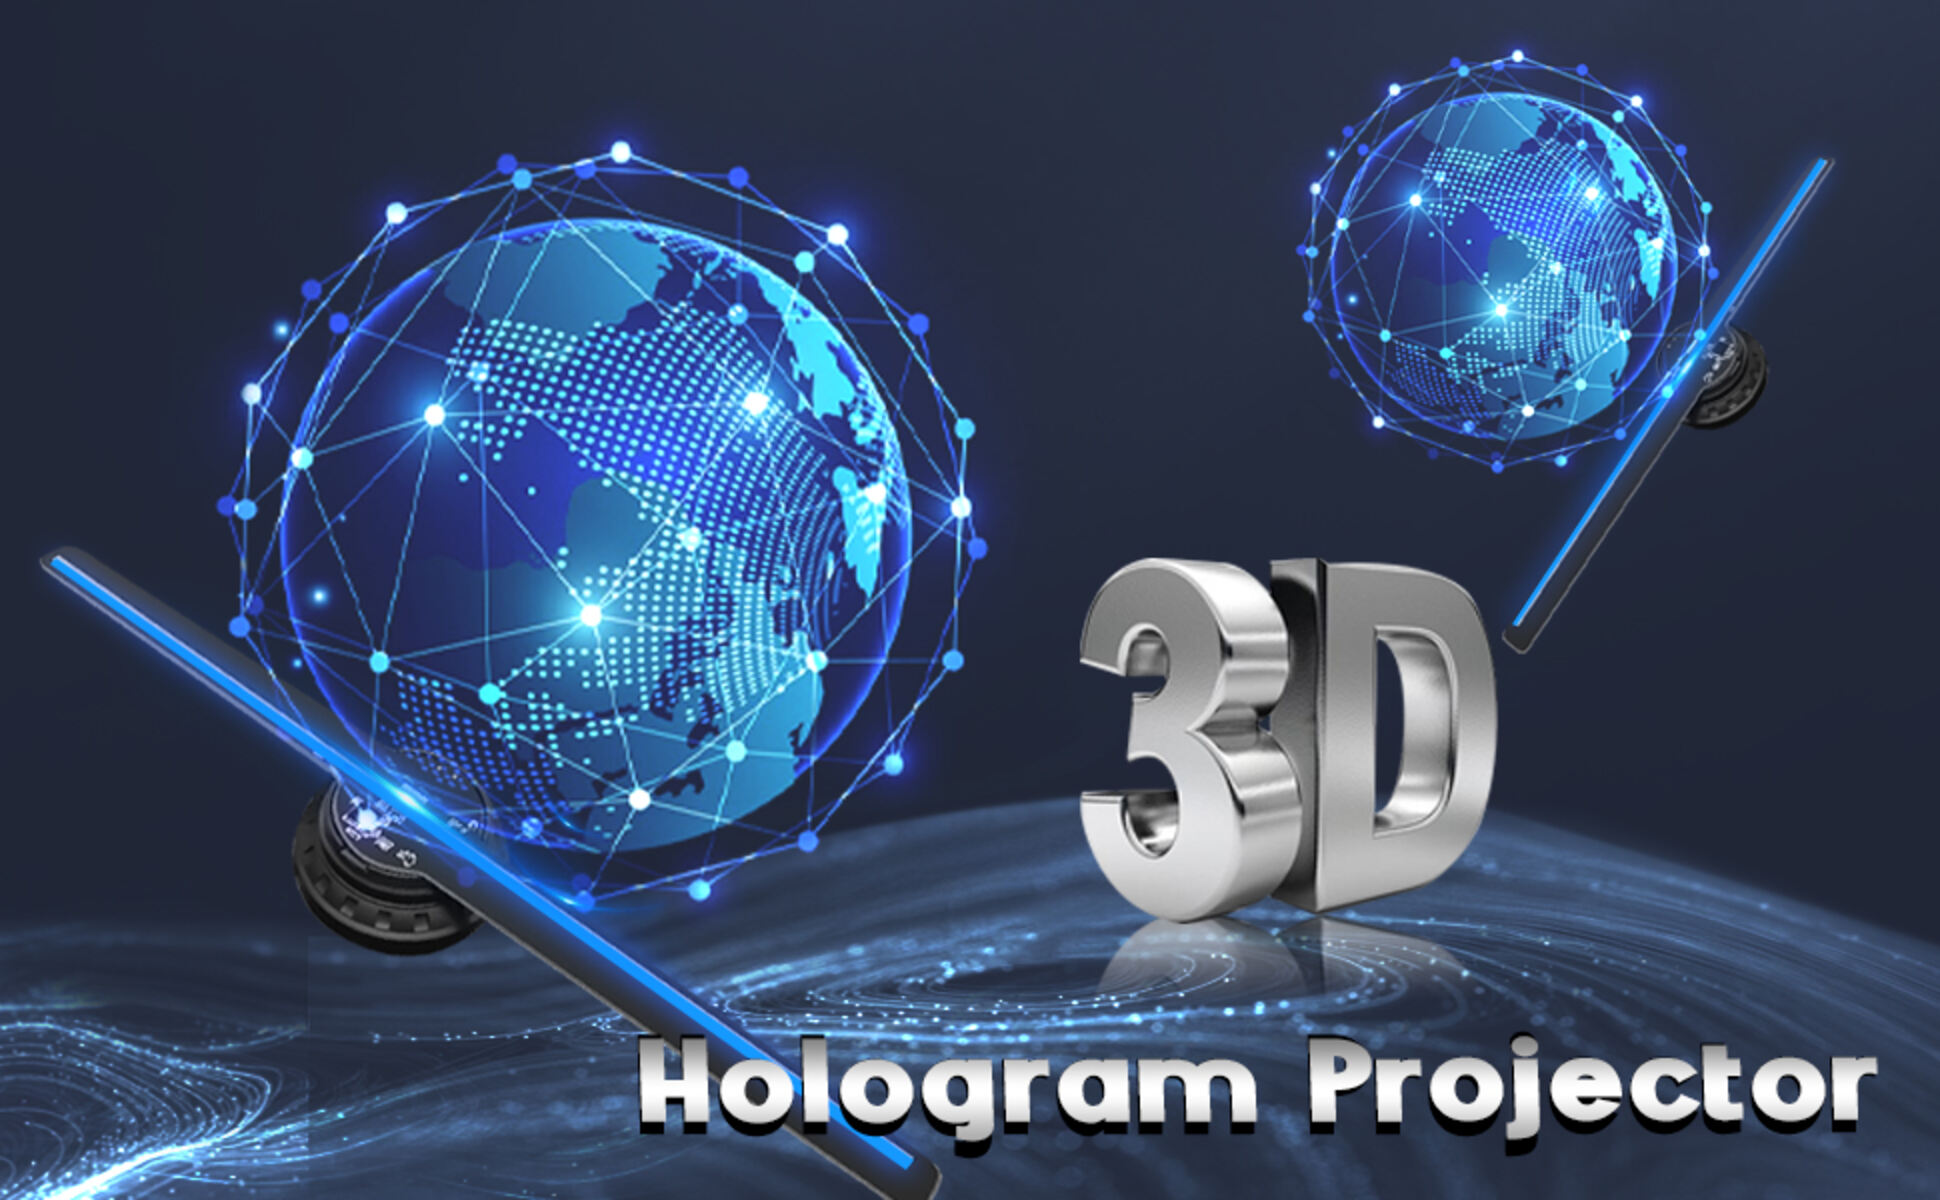 3D Hologram Projector How It Works